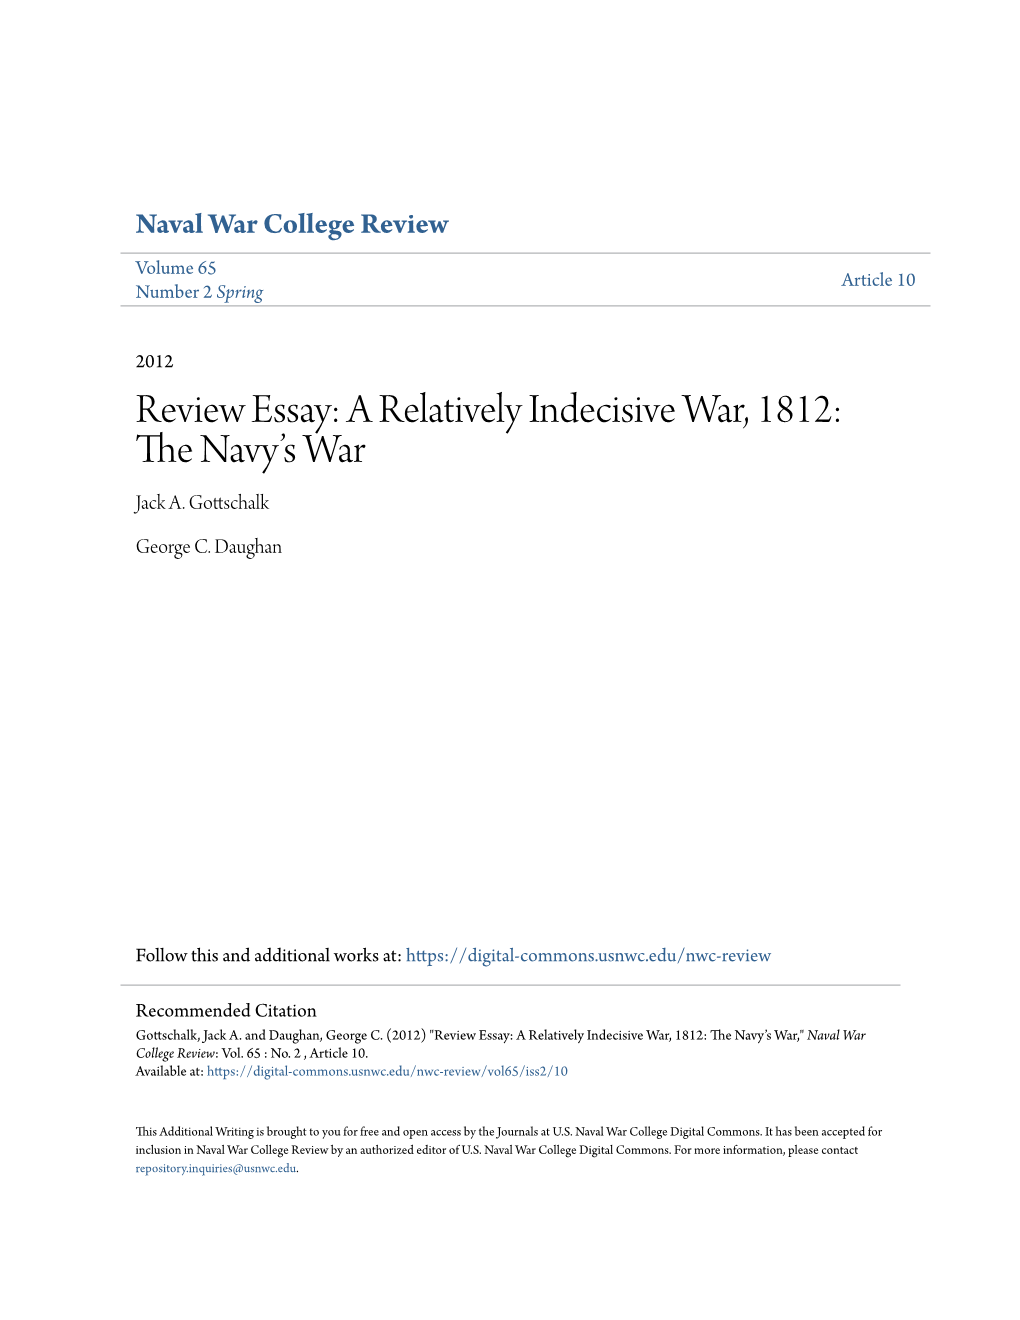 Review Essay: a Relatively Indecisive War, 1812: the Navy's